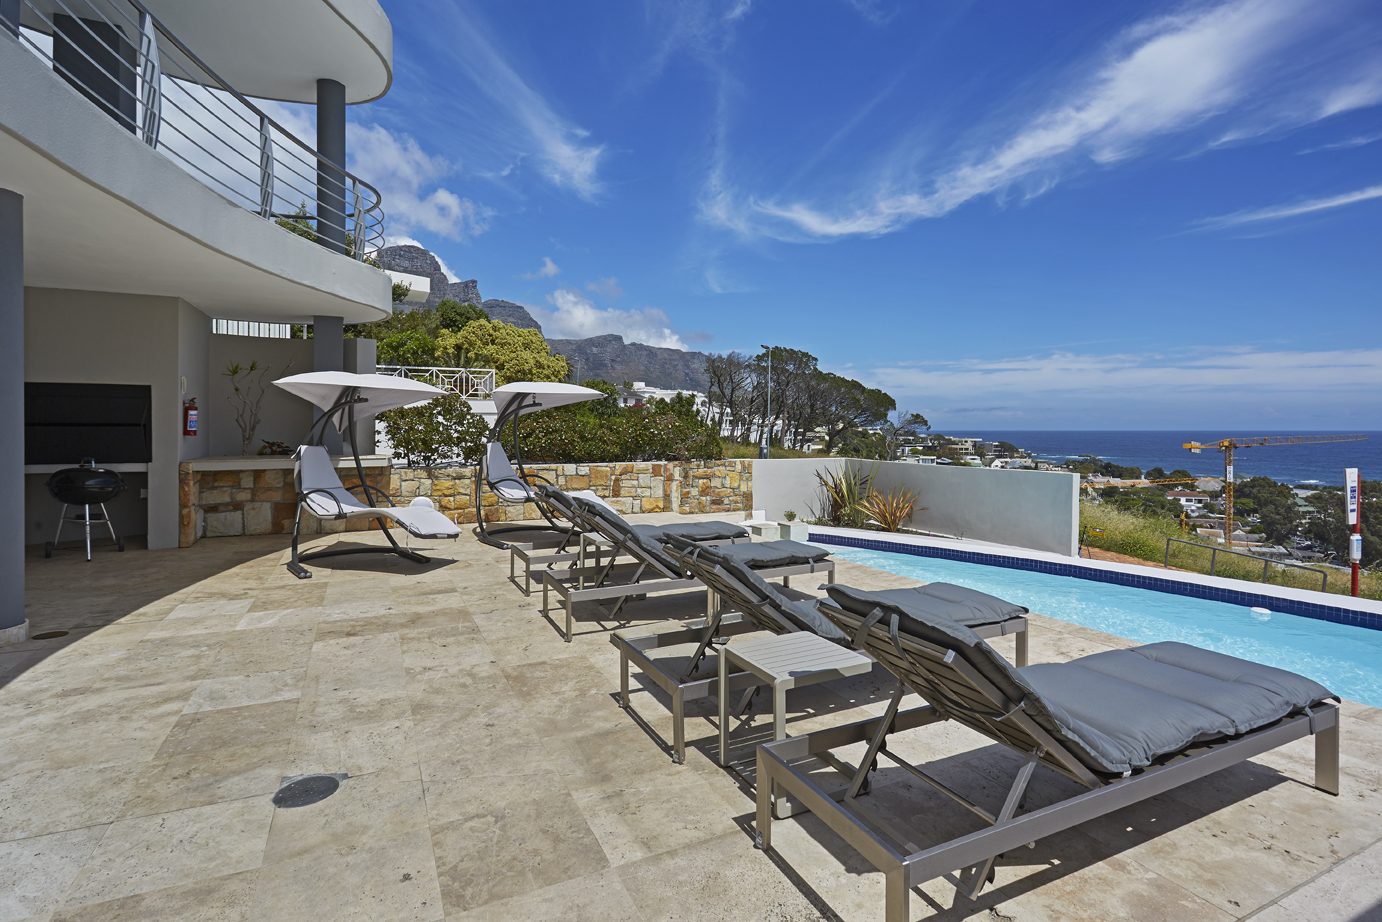 Photo 6 of Villa Waves accommodation in Camps Bay, Cape Town with 4 bedrooms and 4 bathrooms